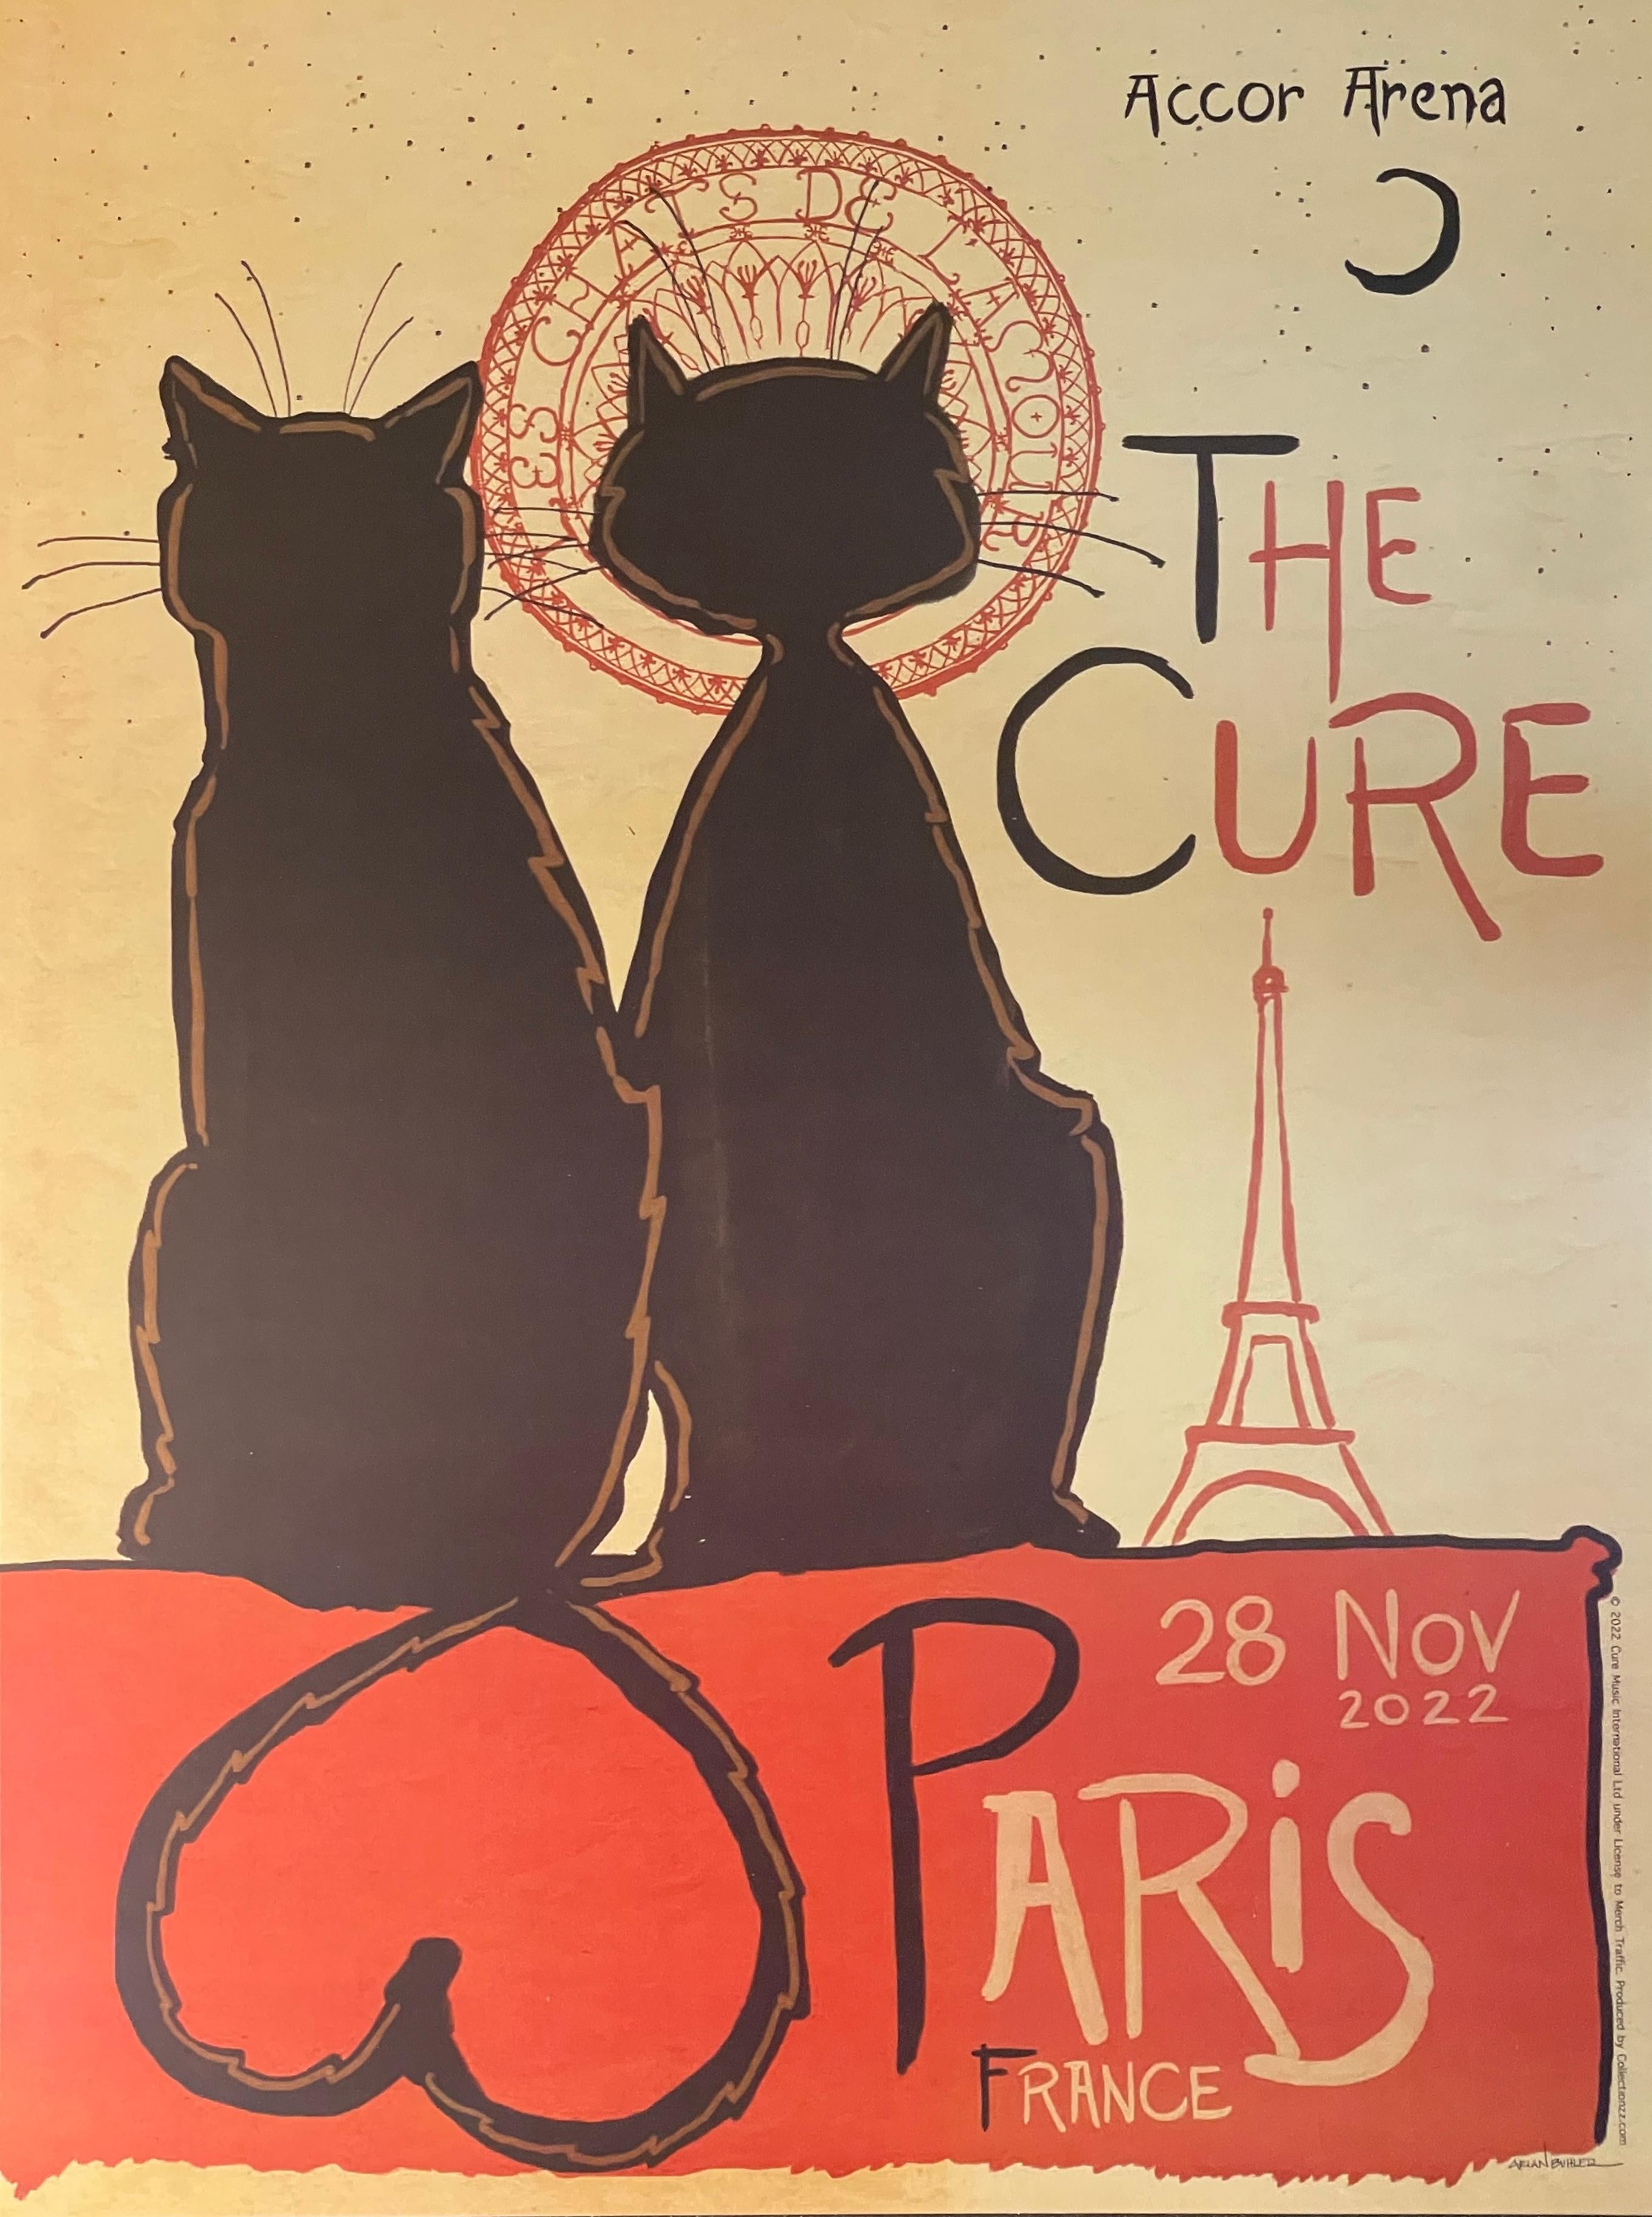 Officially Licensed THE CURE, 2022 Paris tour poster.

18 X 24 Inches.